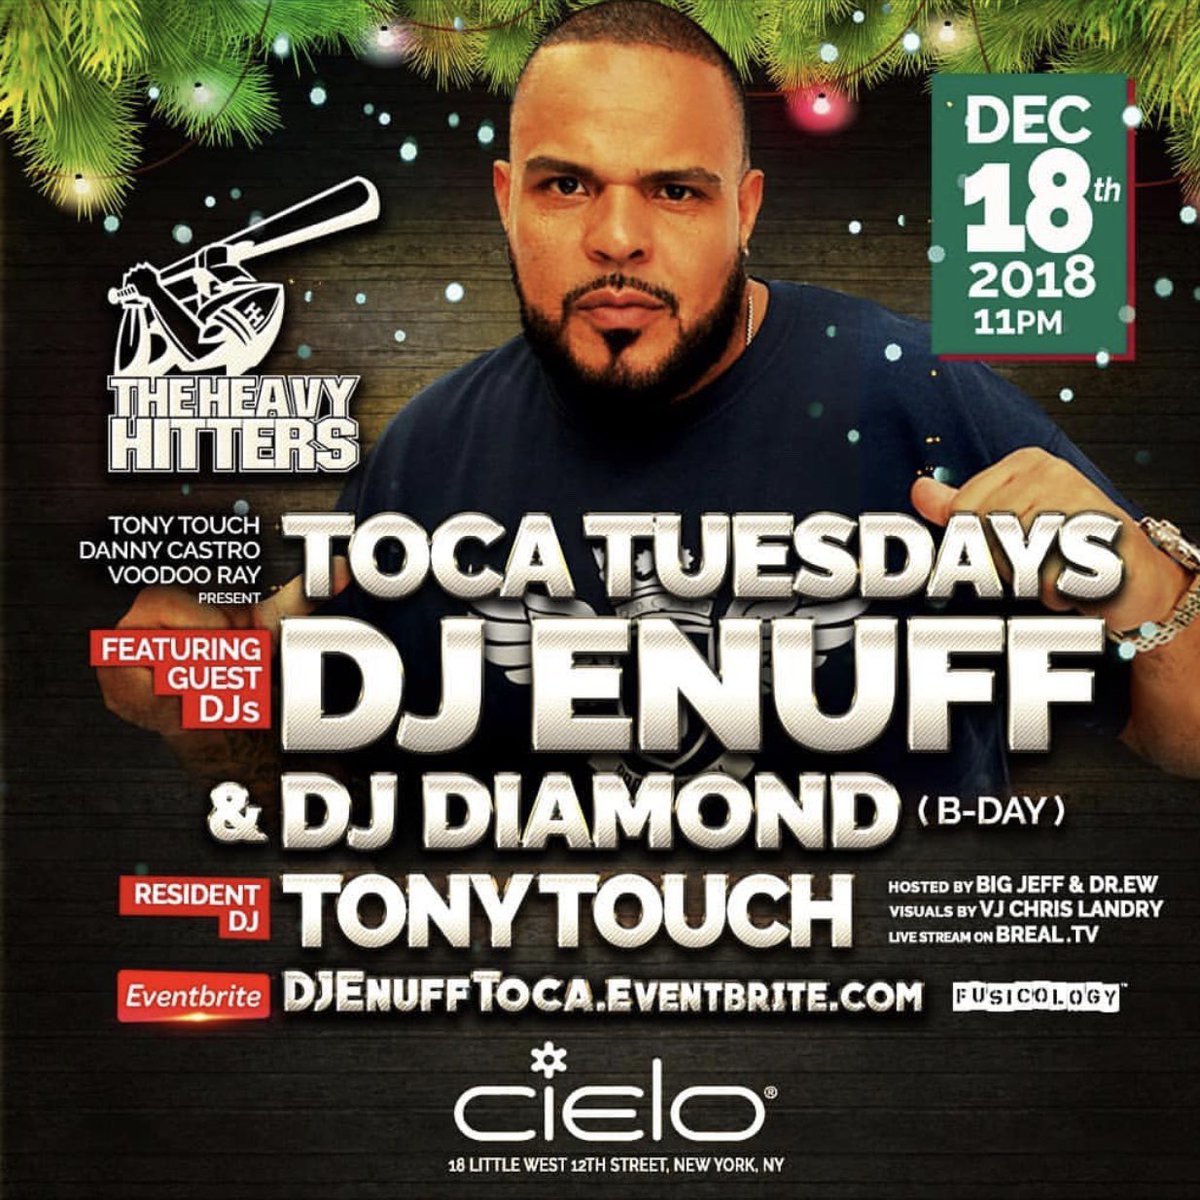 TONIGHT | The return of DJ ENUFF for one of TOCA TUESDAY'S last nights at Cielo!! We're also celebrating DJ DIAMOND spinning on his Birthday, along with DJ TONY TOUCH.